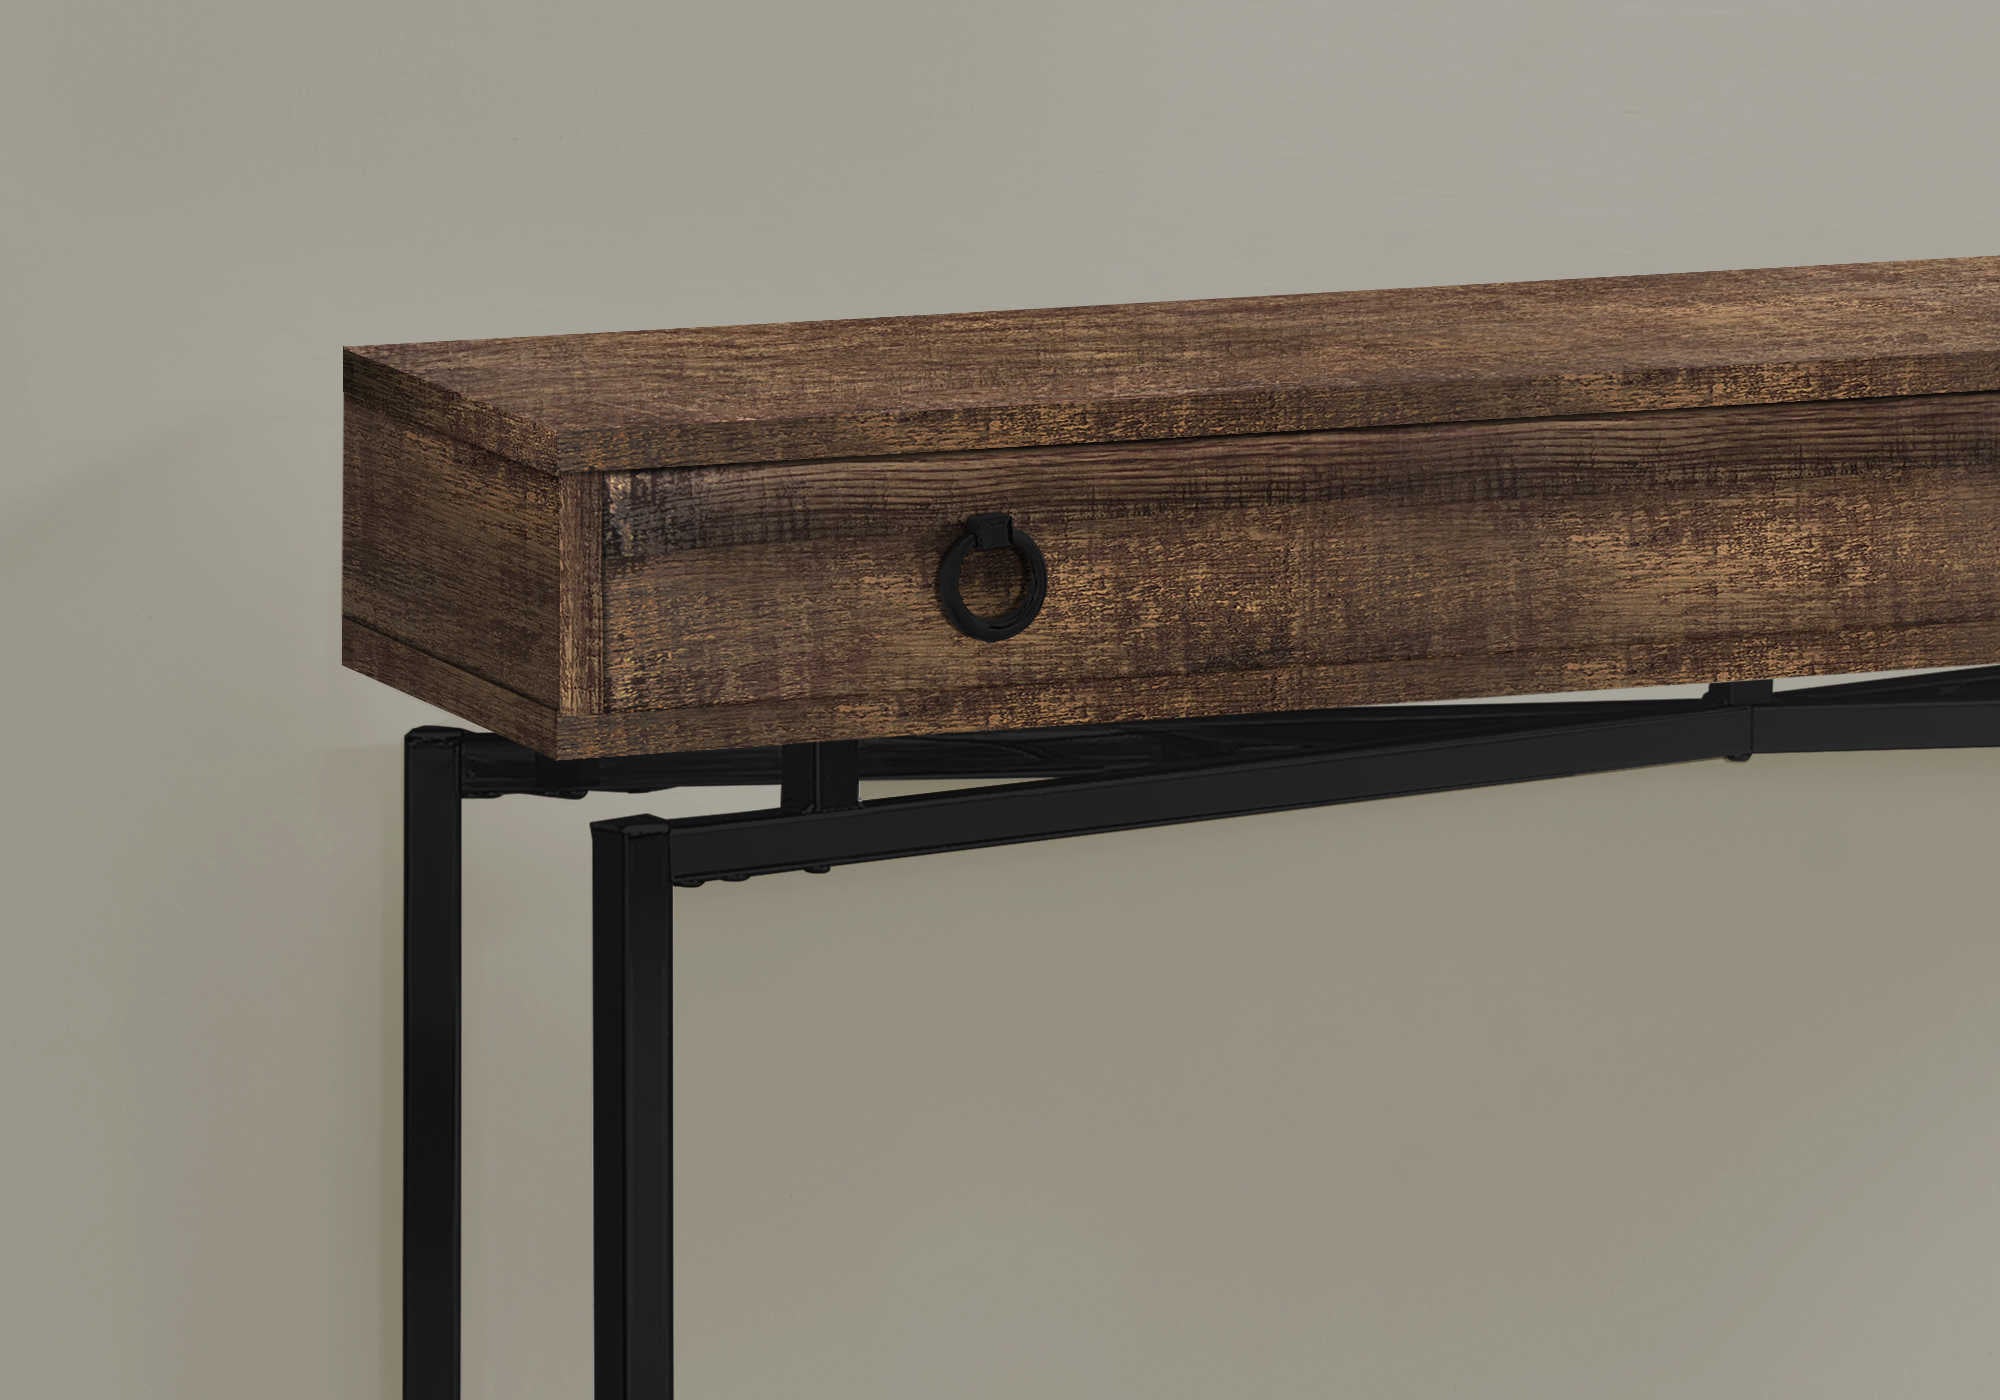 ACCENT TABLE - 42"L / BROWN RECLAIMED WOOD/ BLACK CONSOLE